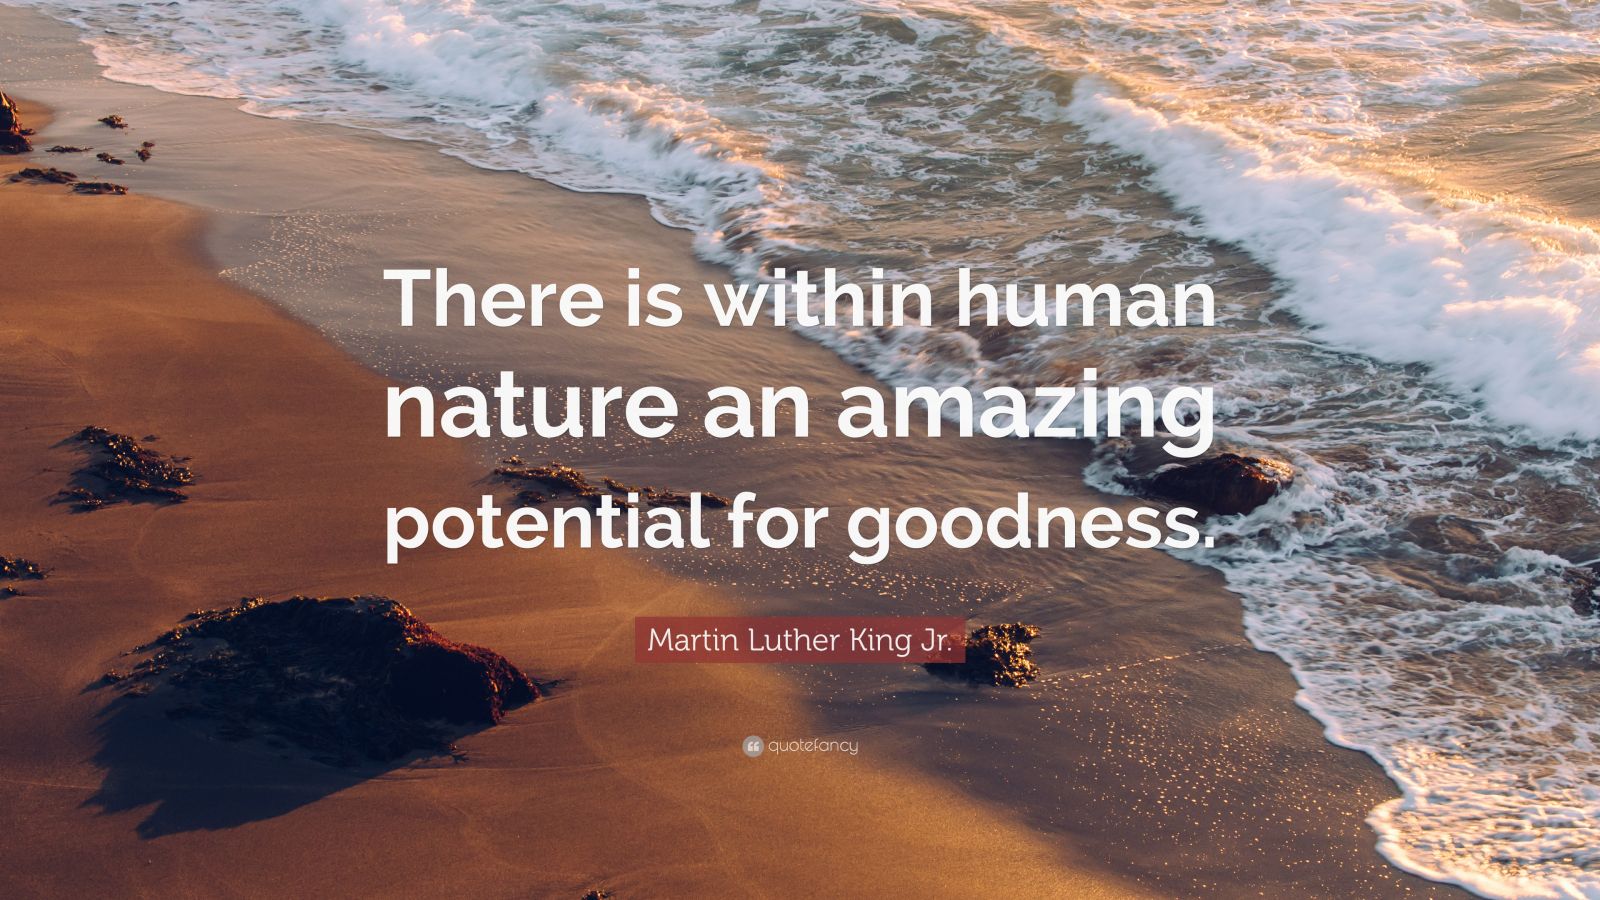 Martin Luther King Jr. Quote: “There is within human nature an amazing